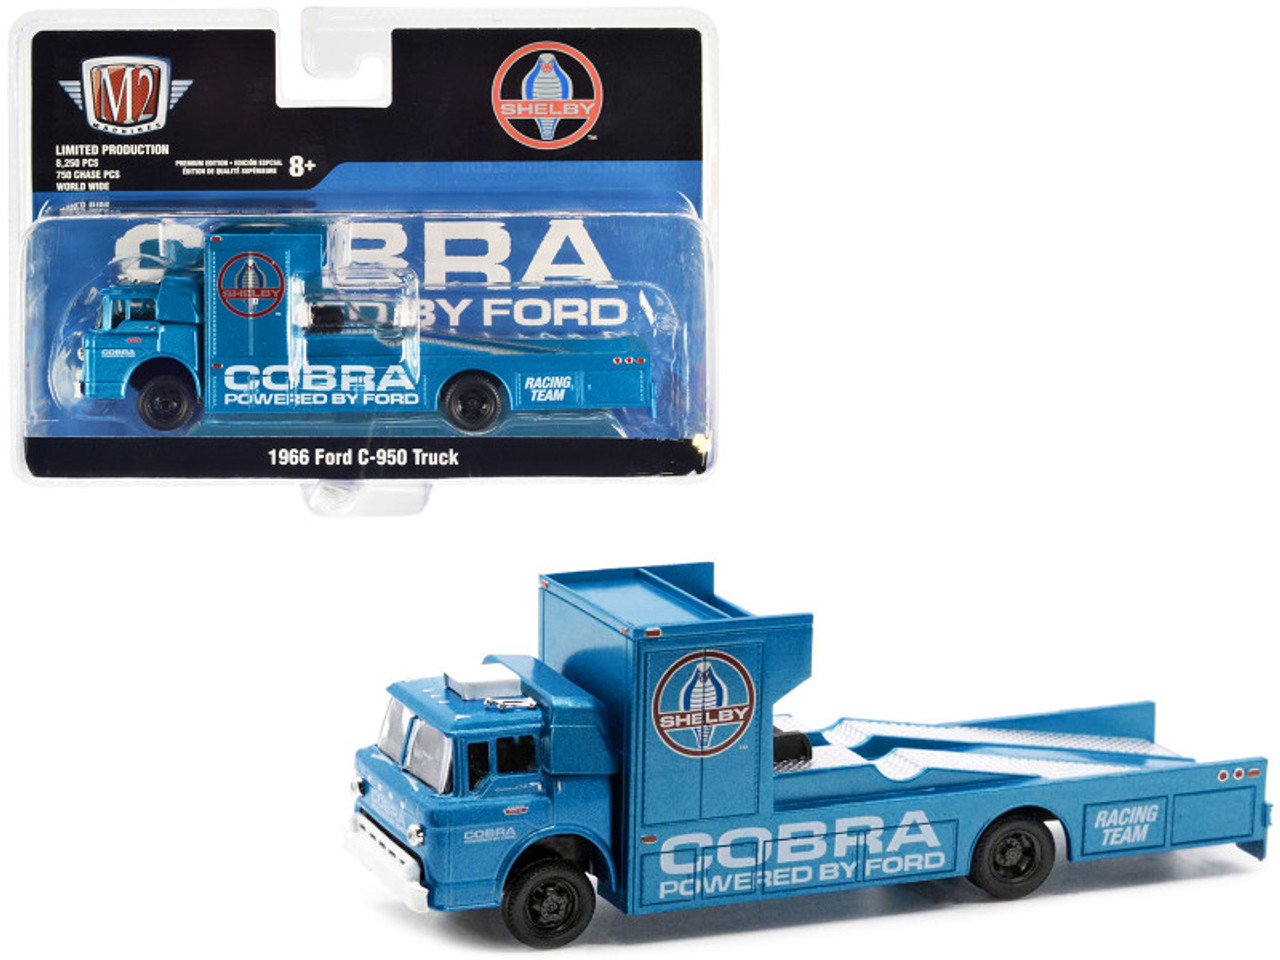 1966 Ford C-950 Ramp Truck Guardsman Blue Metallic "Shelby Cobra Racing Team" Limited Edition to 8250 pieces Worldwide 1/64 Diecast Model Car by M2 Machine